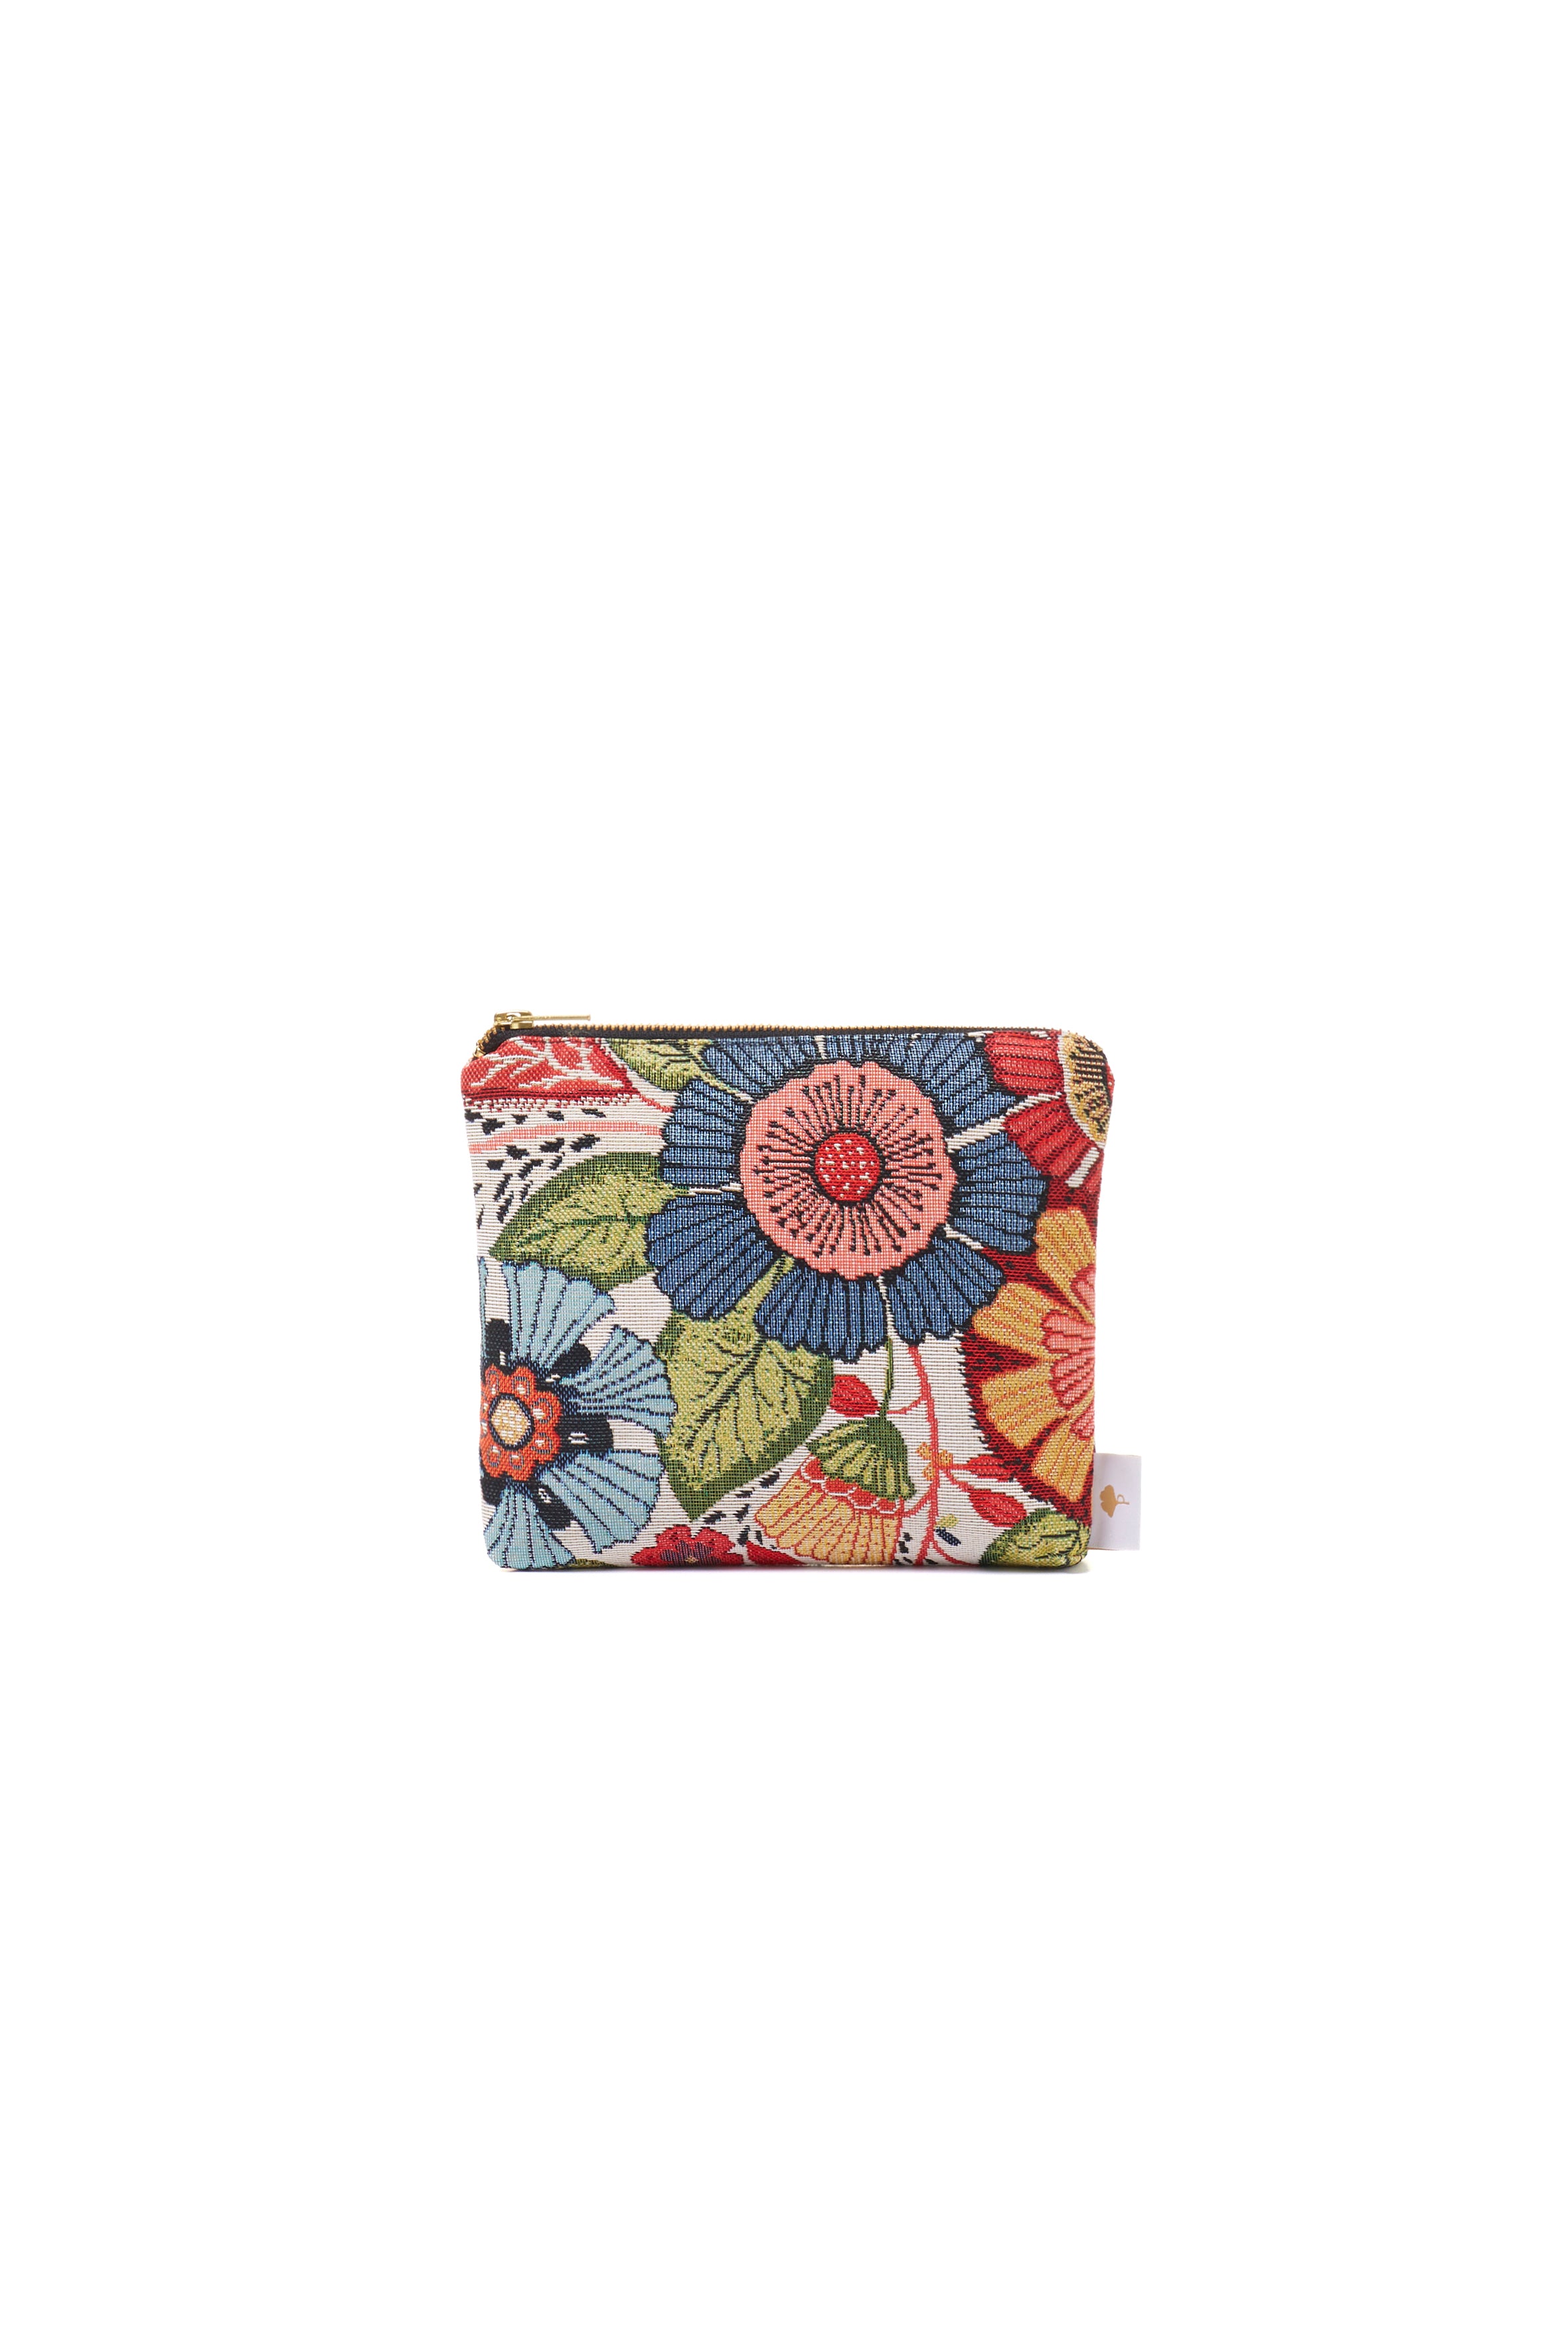 TRAVEL POUCH SMALL - FLOWER